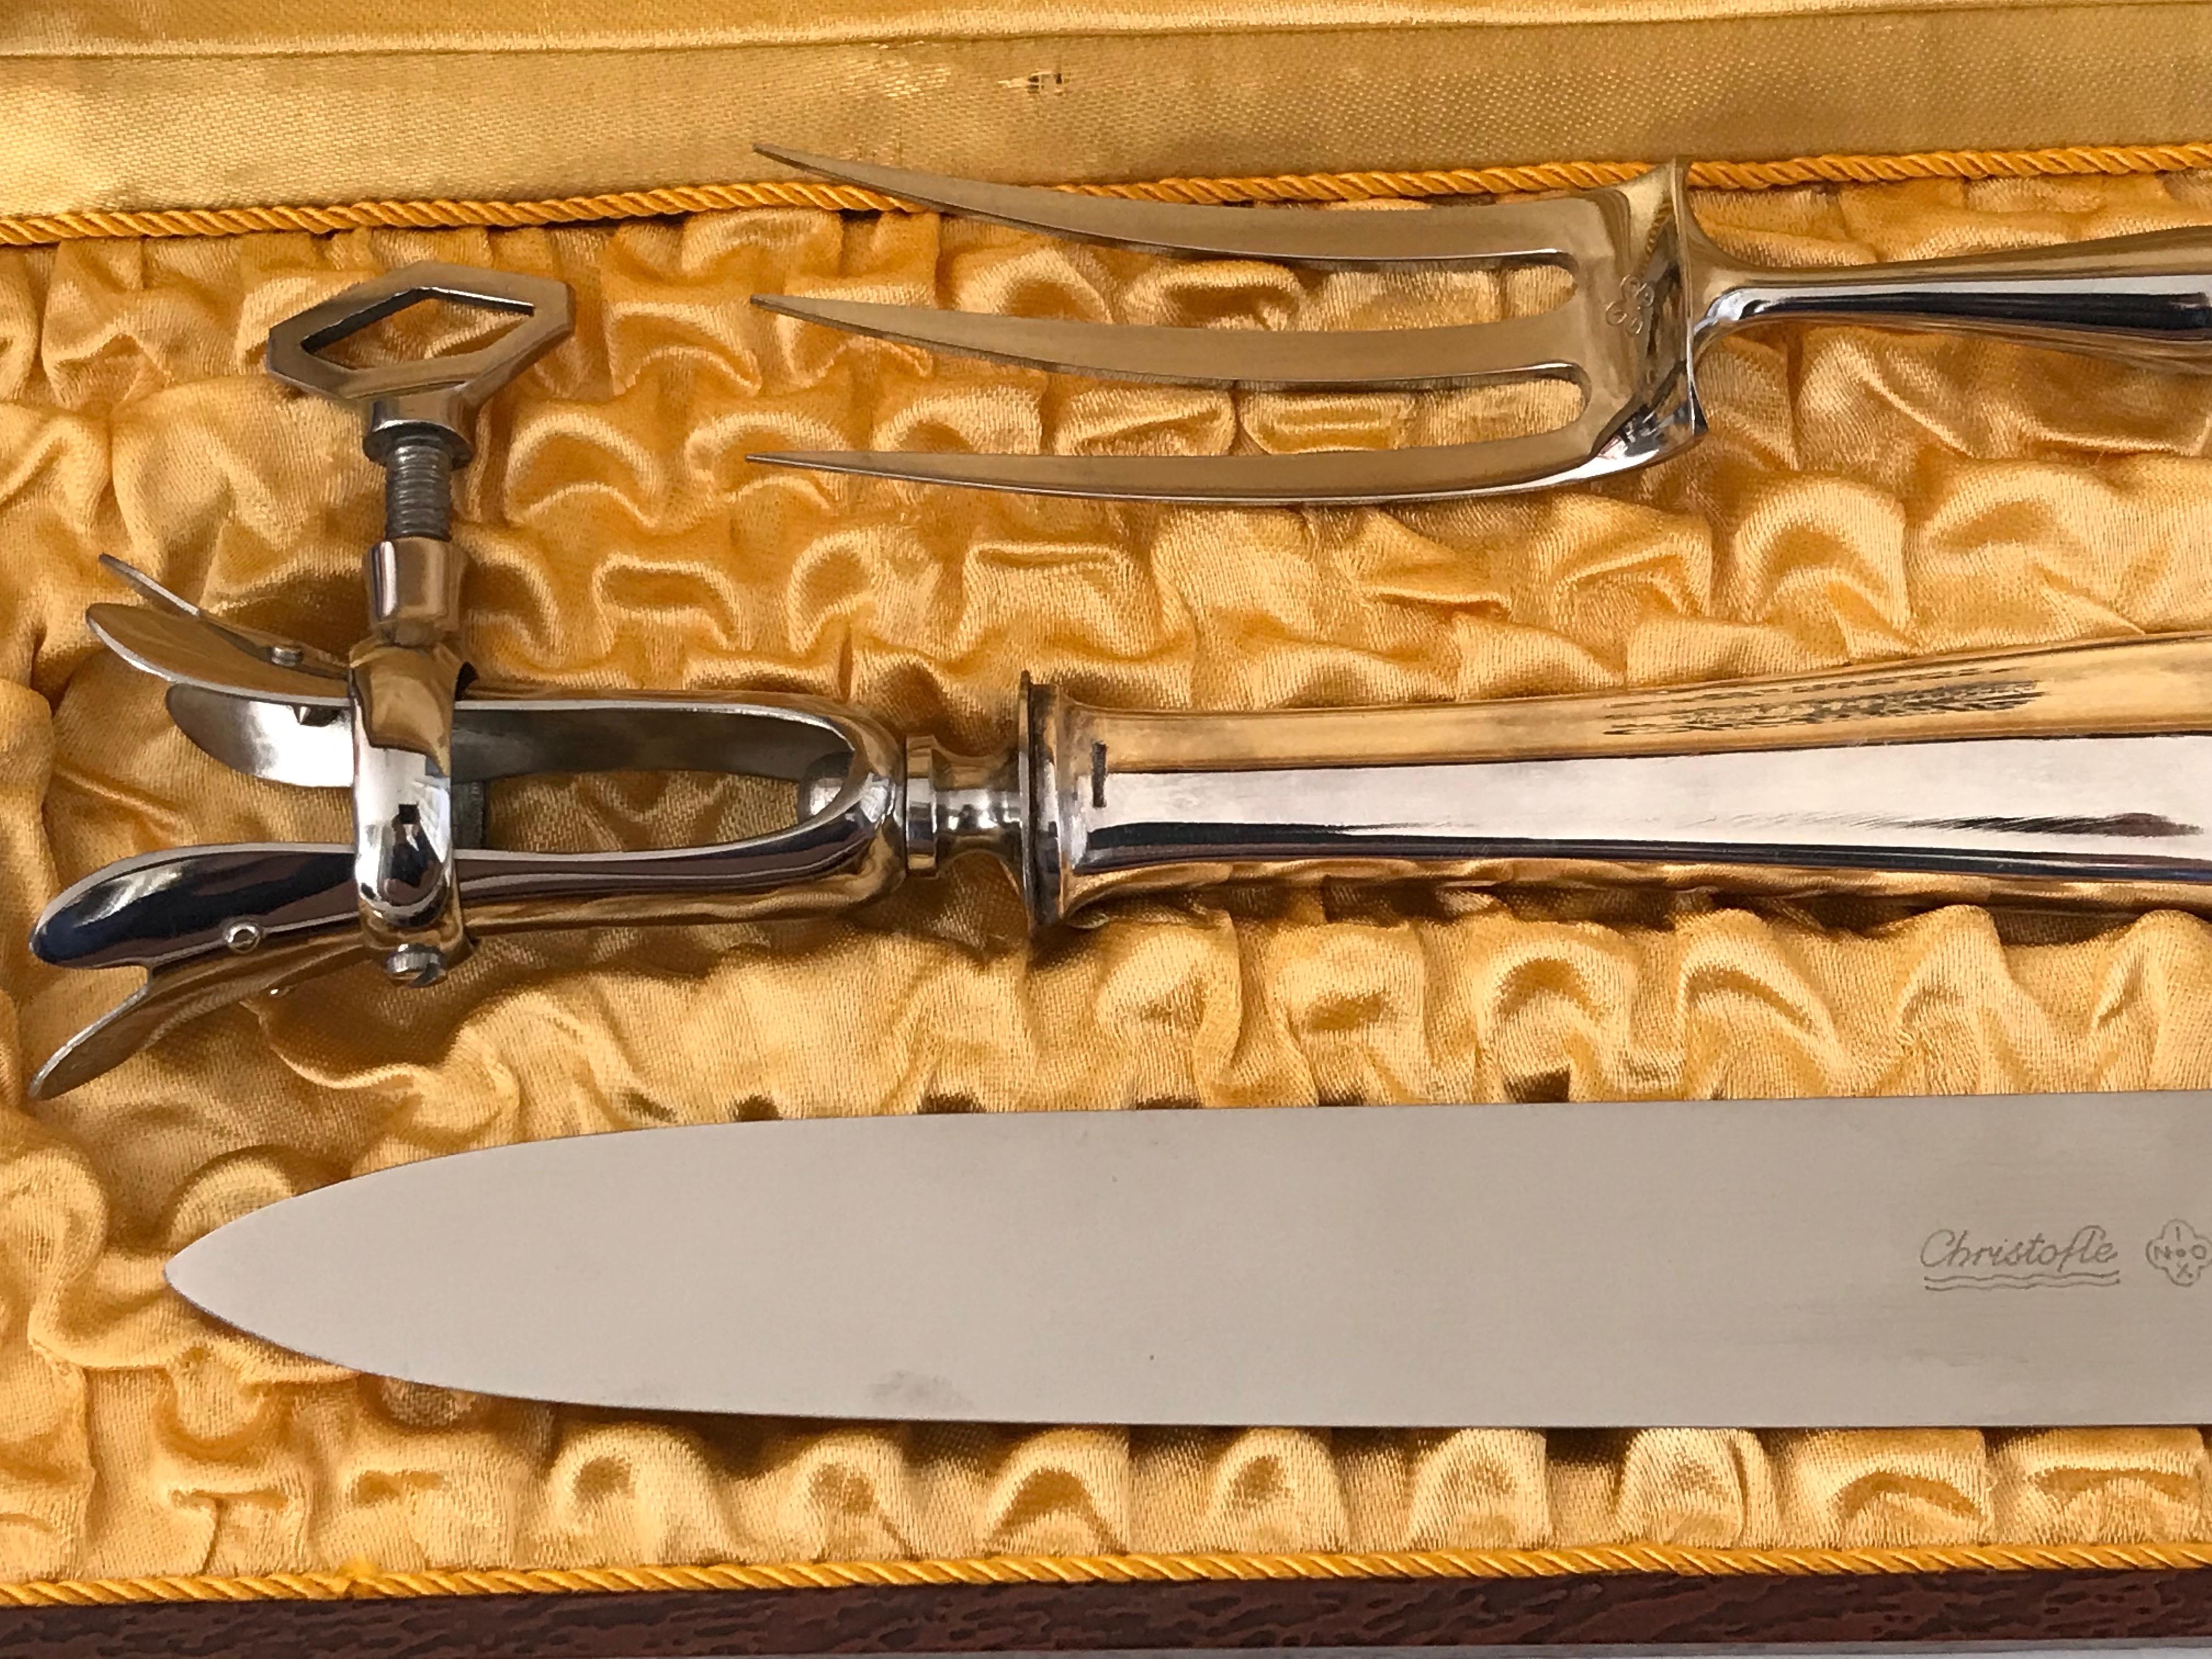 An almost new three pieces meat server set by Christofle in its original box.
Please note that the measurements given are the box's size.